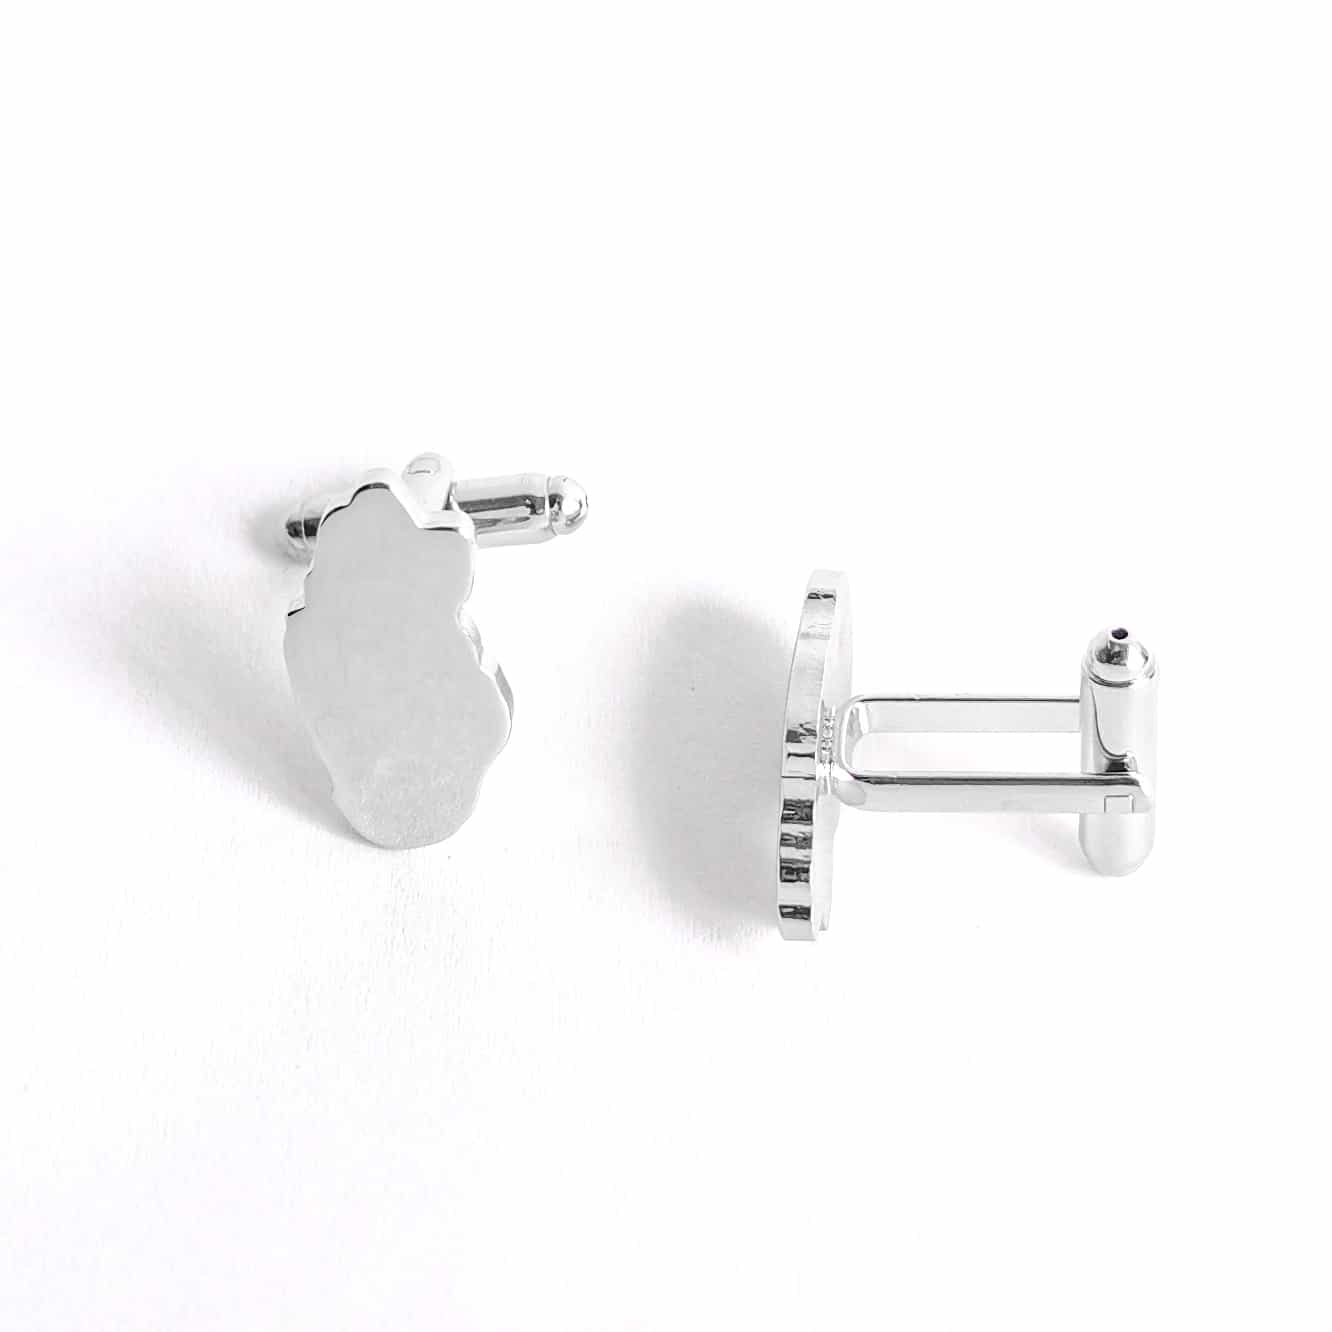 High Quality Qatar Map Shape Metal Cufflink with Leather Crozzling Box Shirt Suit for Men Decoration